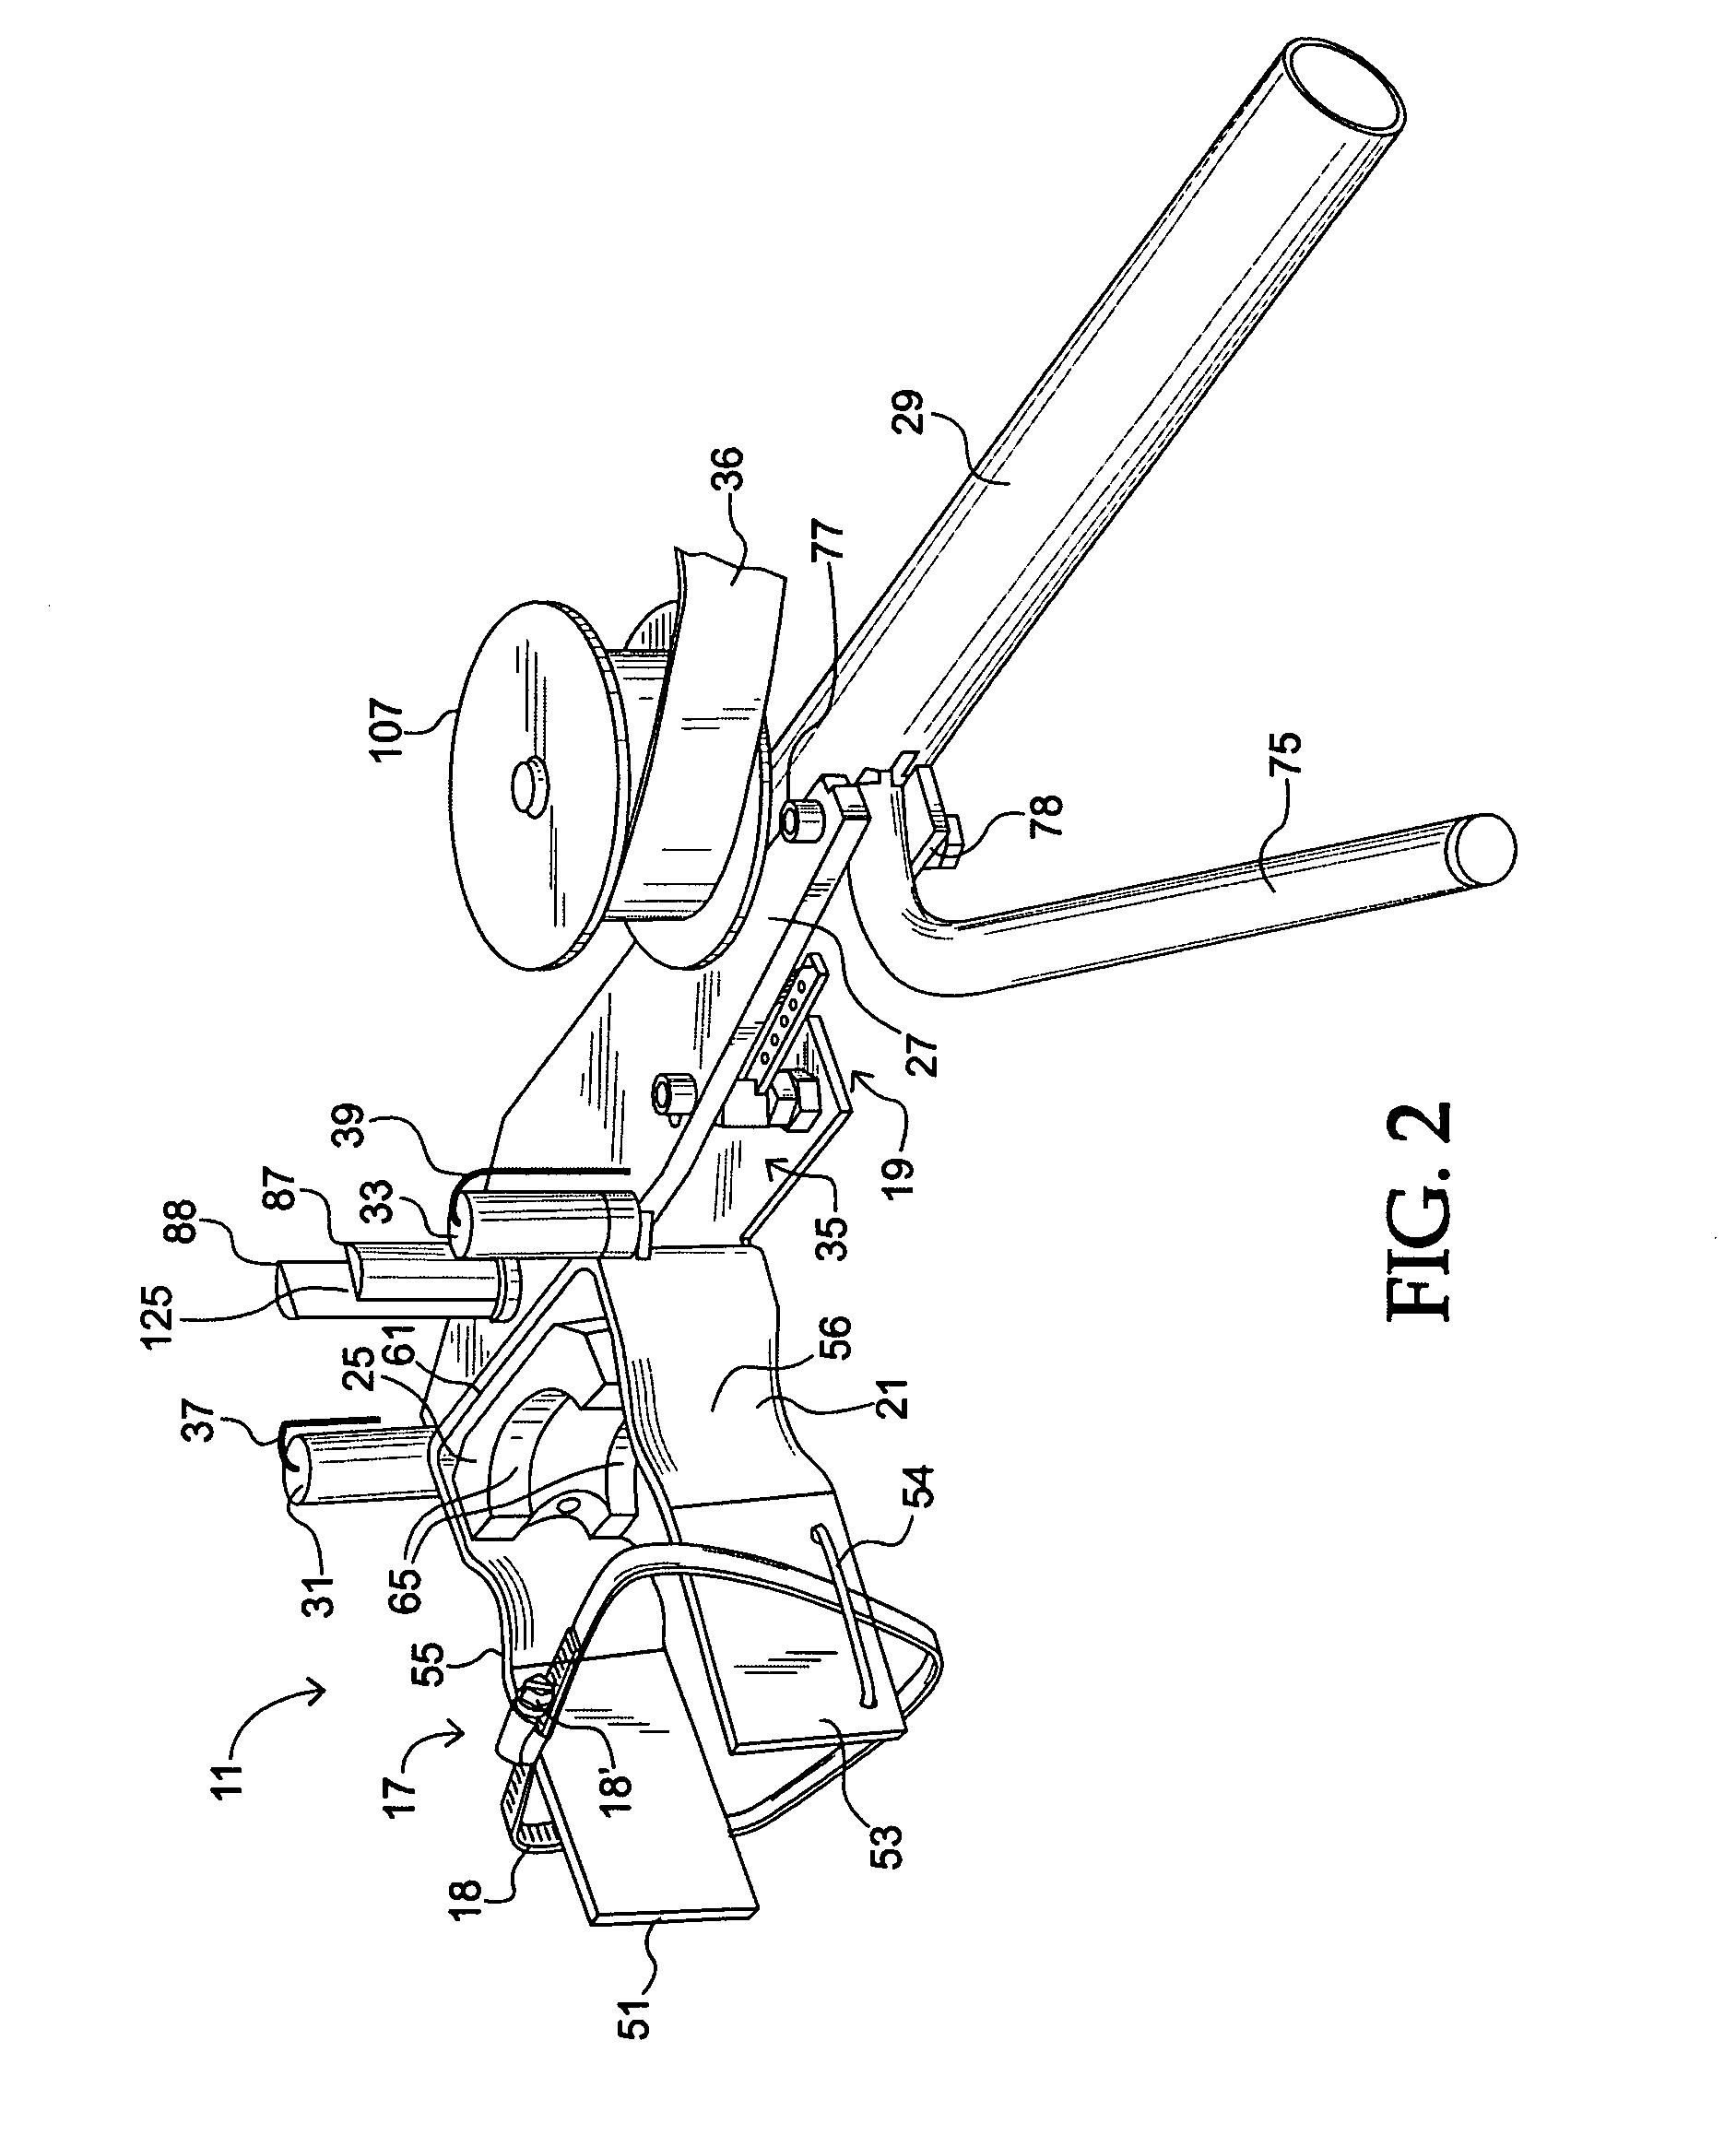 Hand held portable drill guide enabling single handed field setup and having releasable drill gripping securement